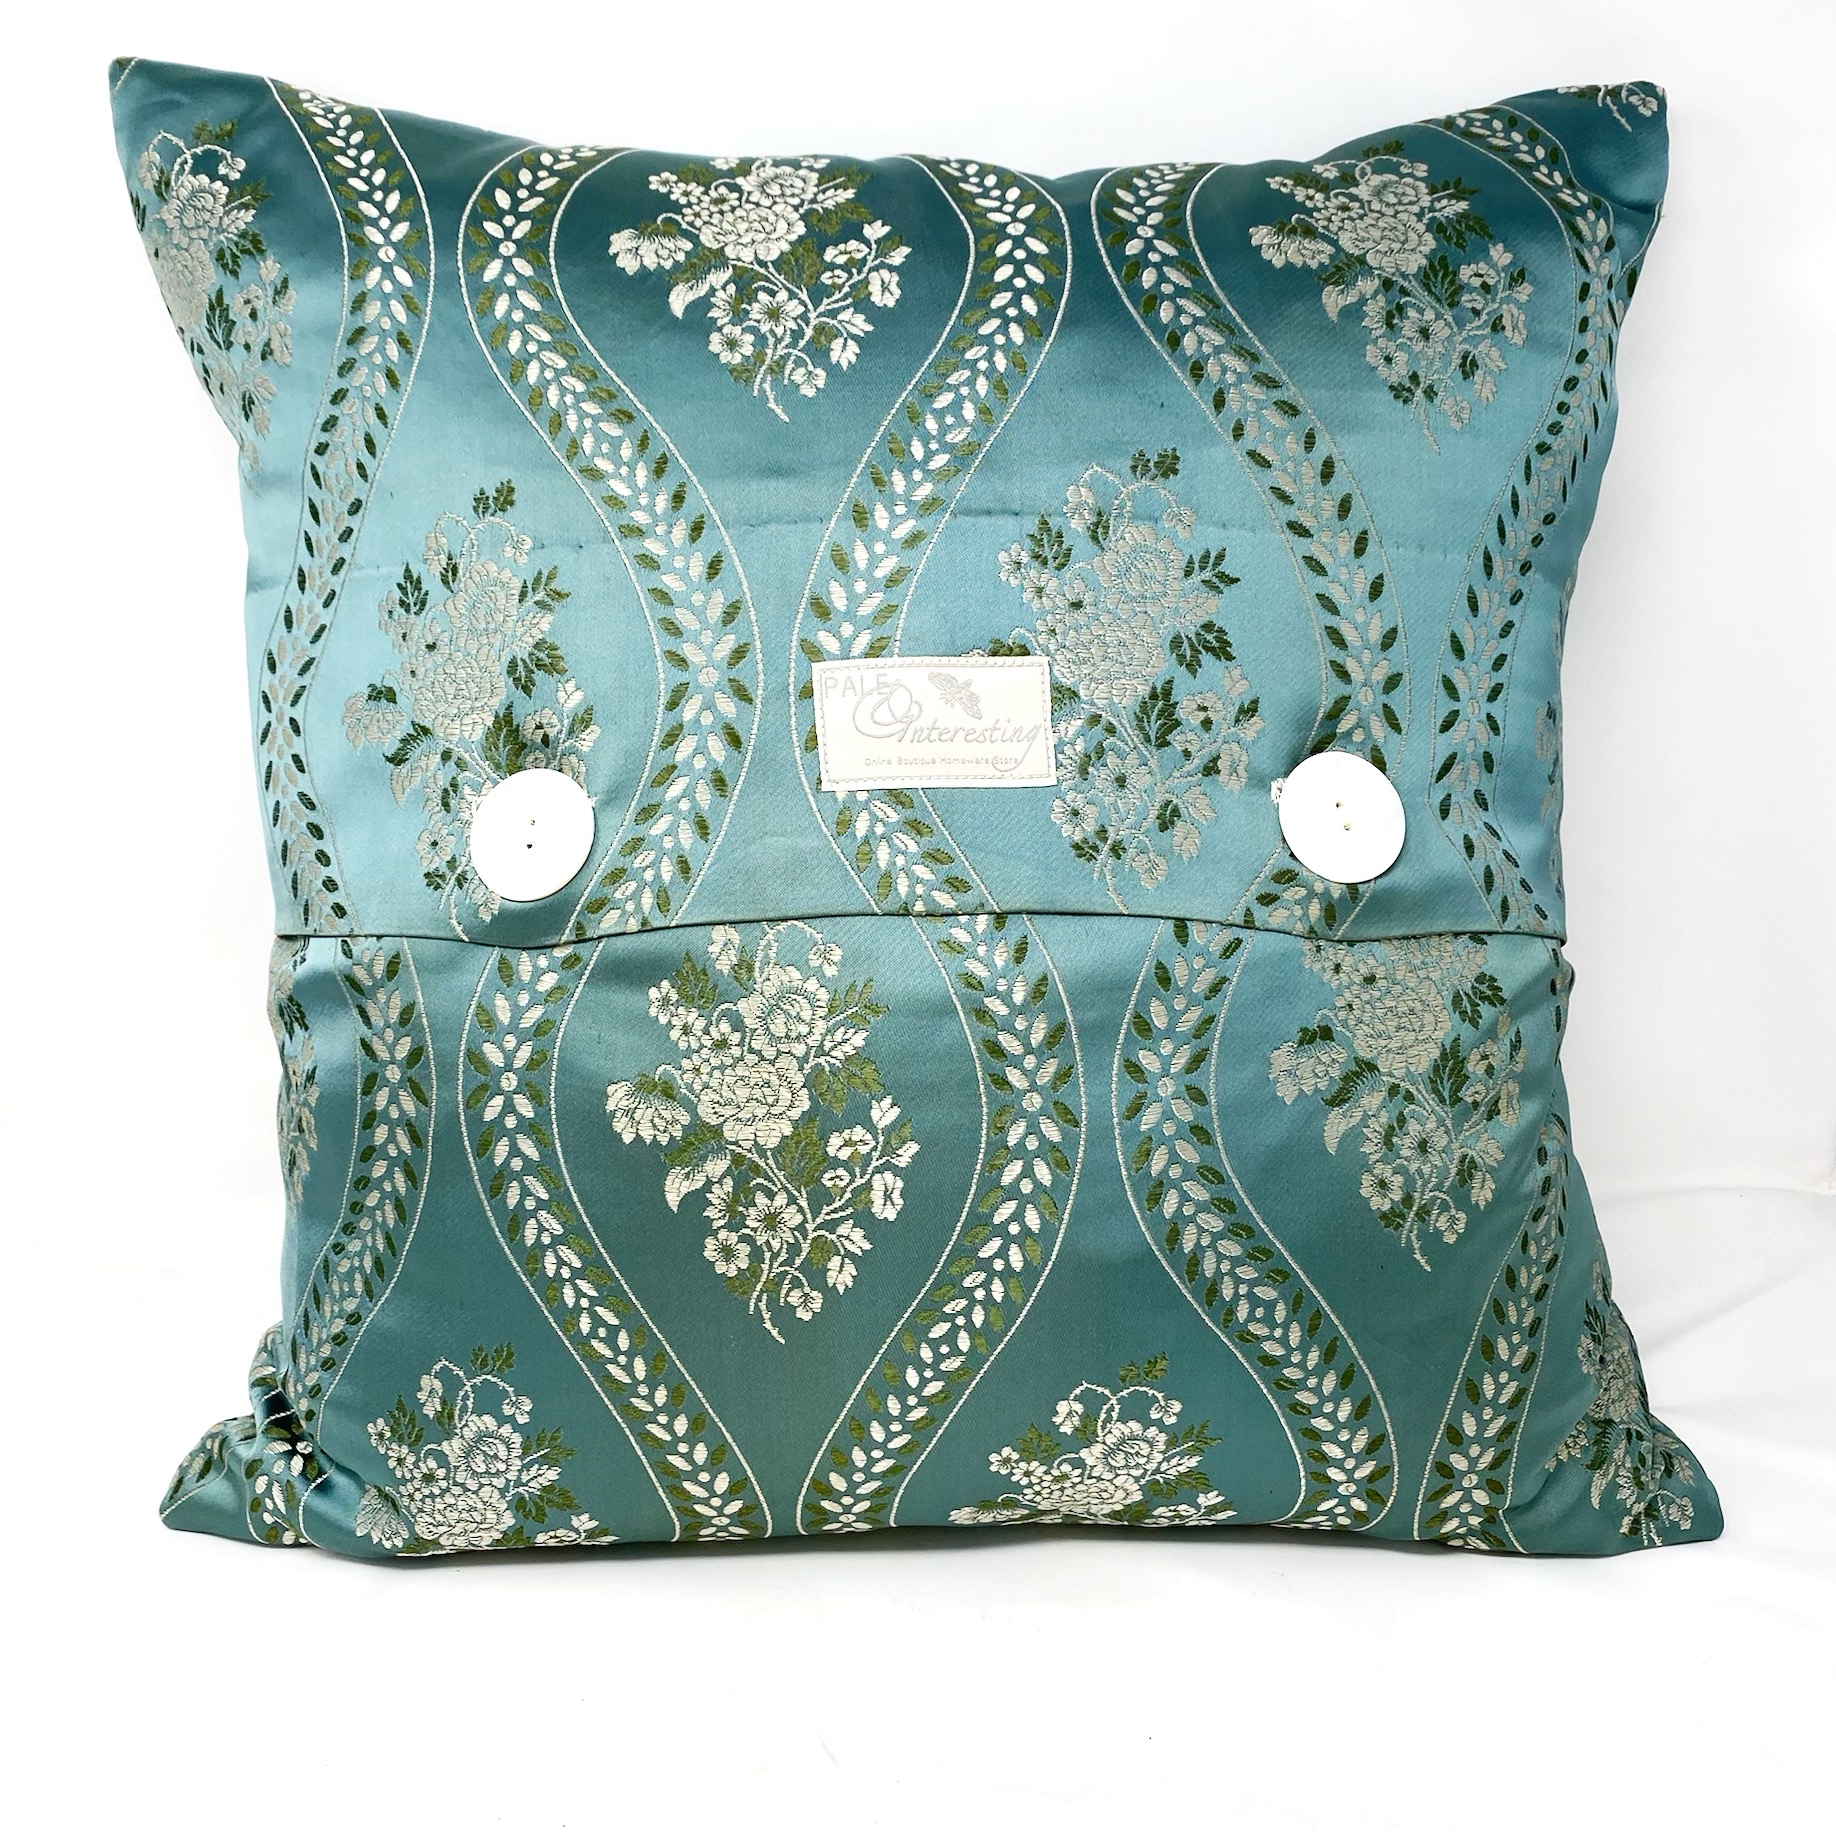 Pale & Interesting Vintage 1950s Teal Brocade Cushion Cover